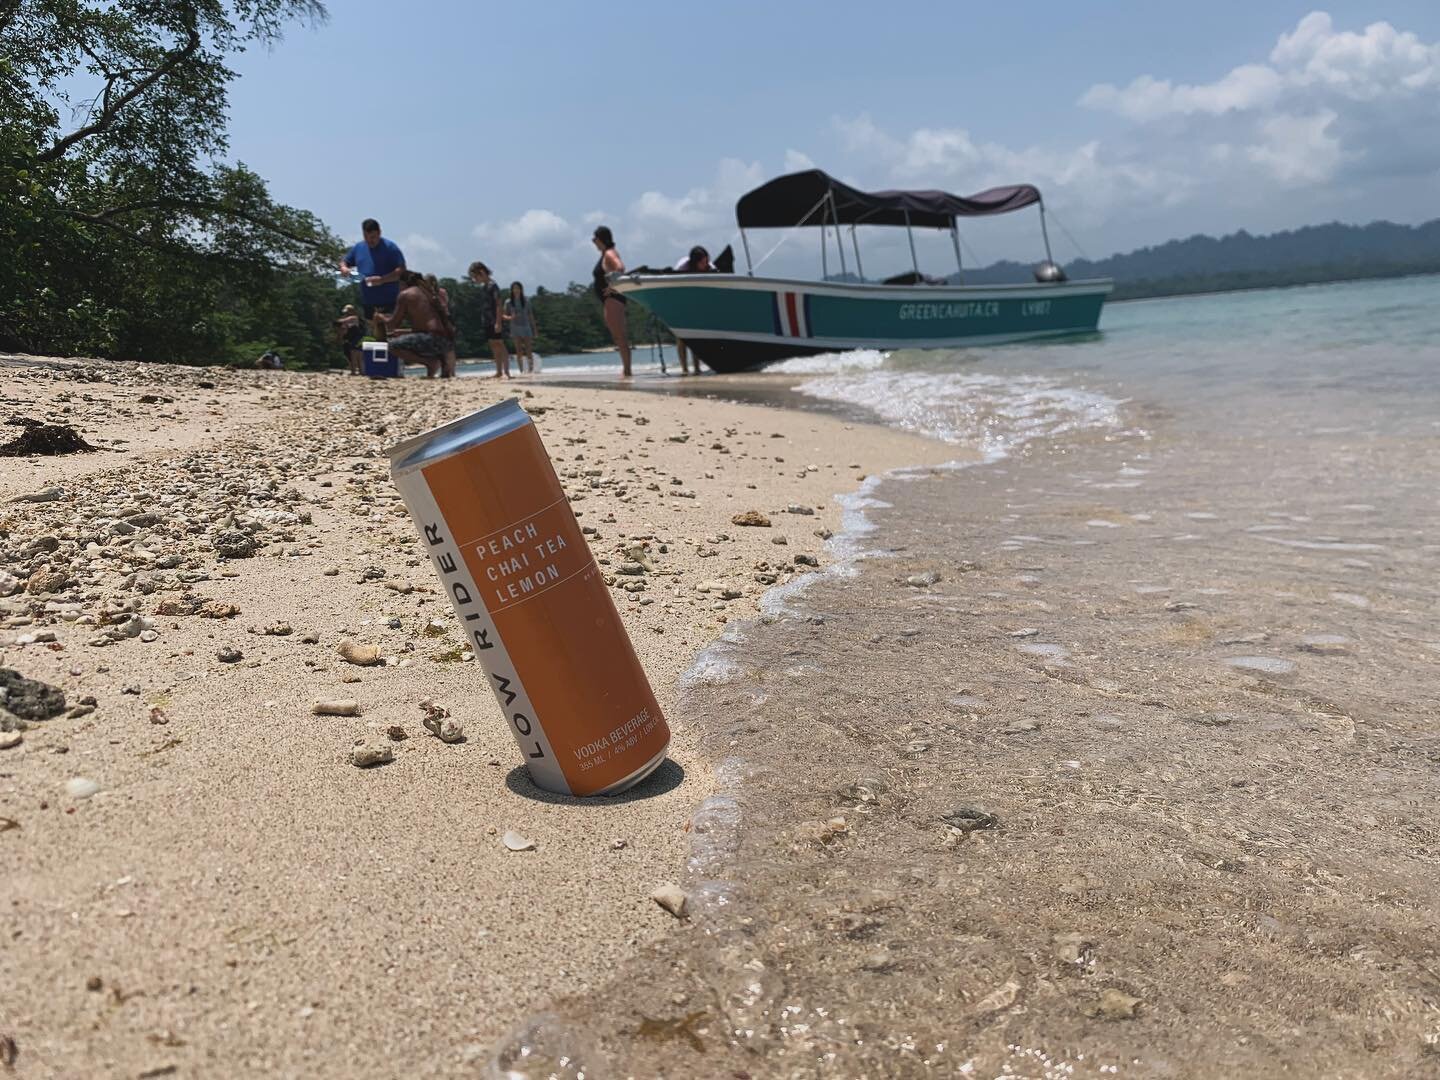 Costa Rica we have @drinklowrider in stores now!!! Check it out @supernegrosupermercado pairs perfectly with the beach and some friendly monkeys. #costaricacraftbeverages #costaricacraftbeer #canadiancraftcocktails